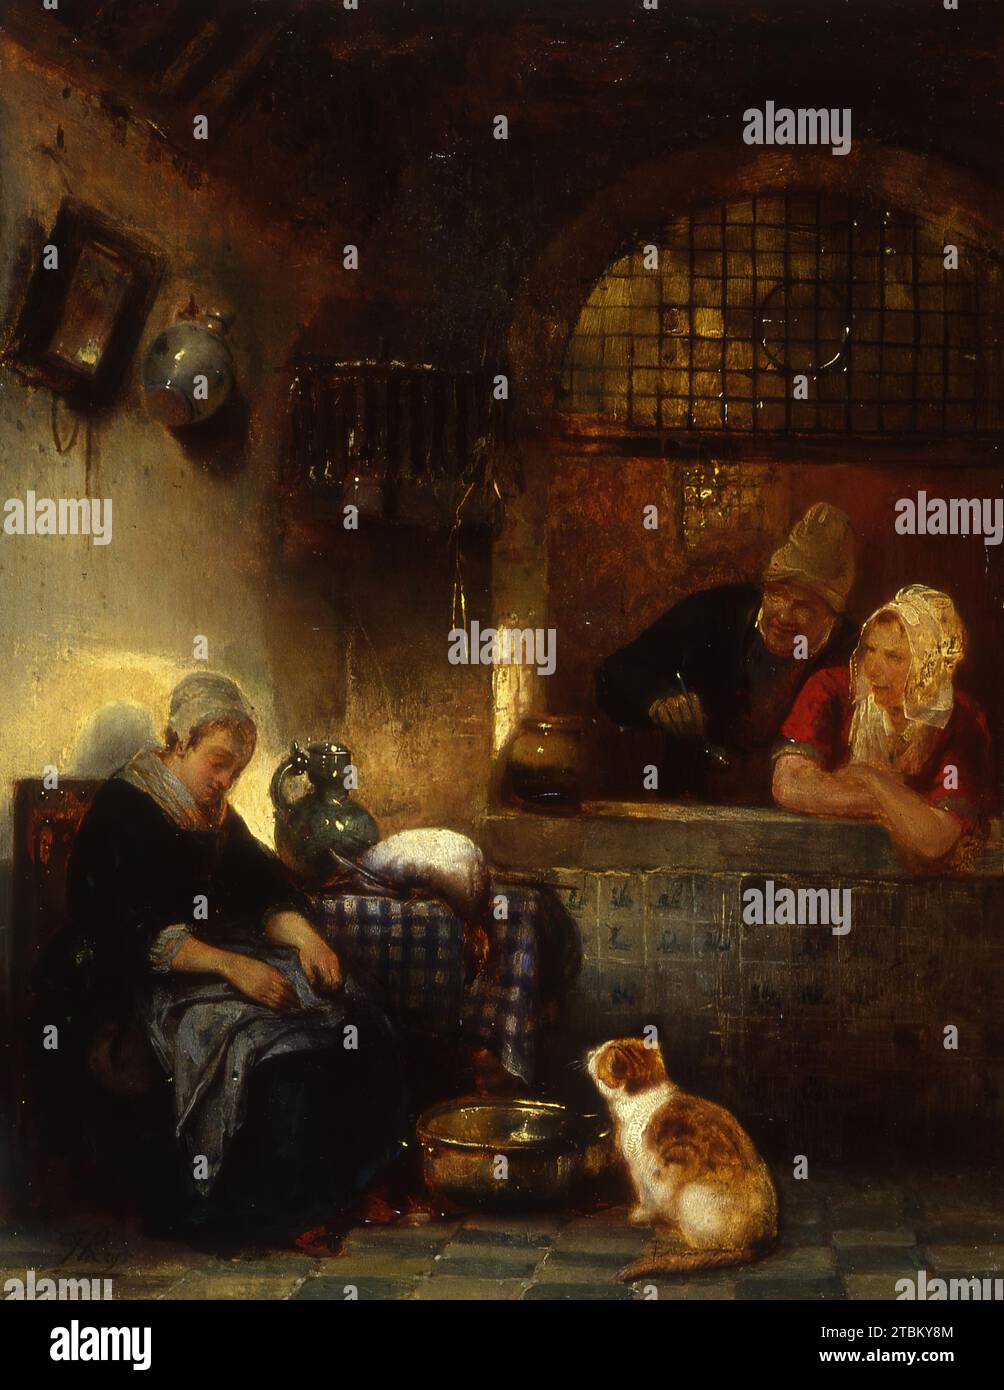 Dutch Interior, c1840. A servant girl has been found asleep by an older couple. Beside her, on a table covered with a checked cloth, is an unplucked dead goose and a large stoneware pitcher; at her feet waits a hungry cat beside a large copper basin. The artist has enriched the kitchen setting with such details as the broken mirror and the ceramic vase suspended from wall pegs, a large wooden-slatted bird-cage, and a wainscot of Delft tiles. Stock Photo